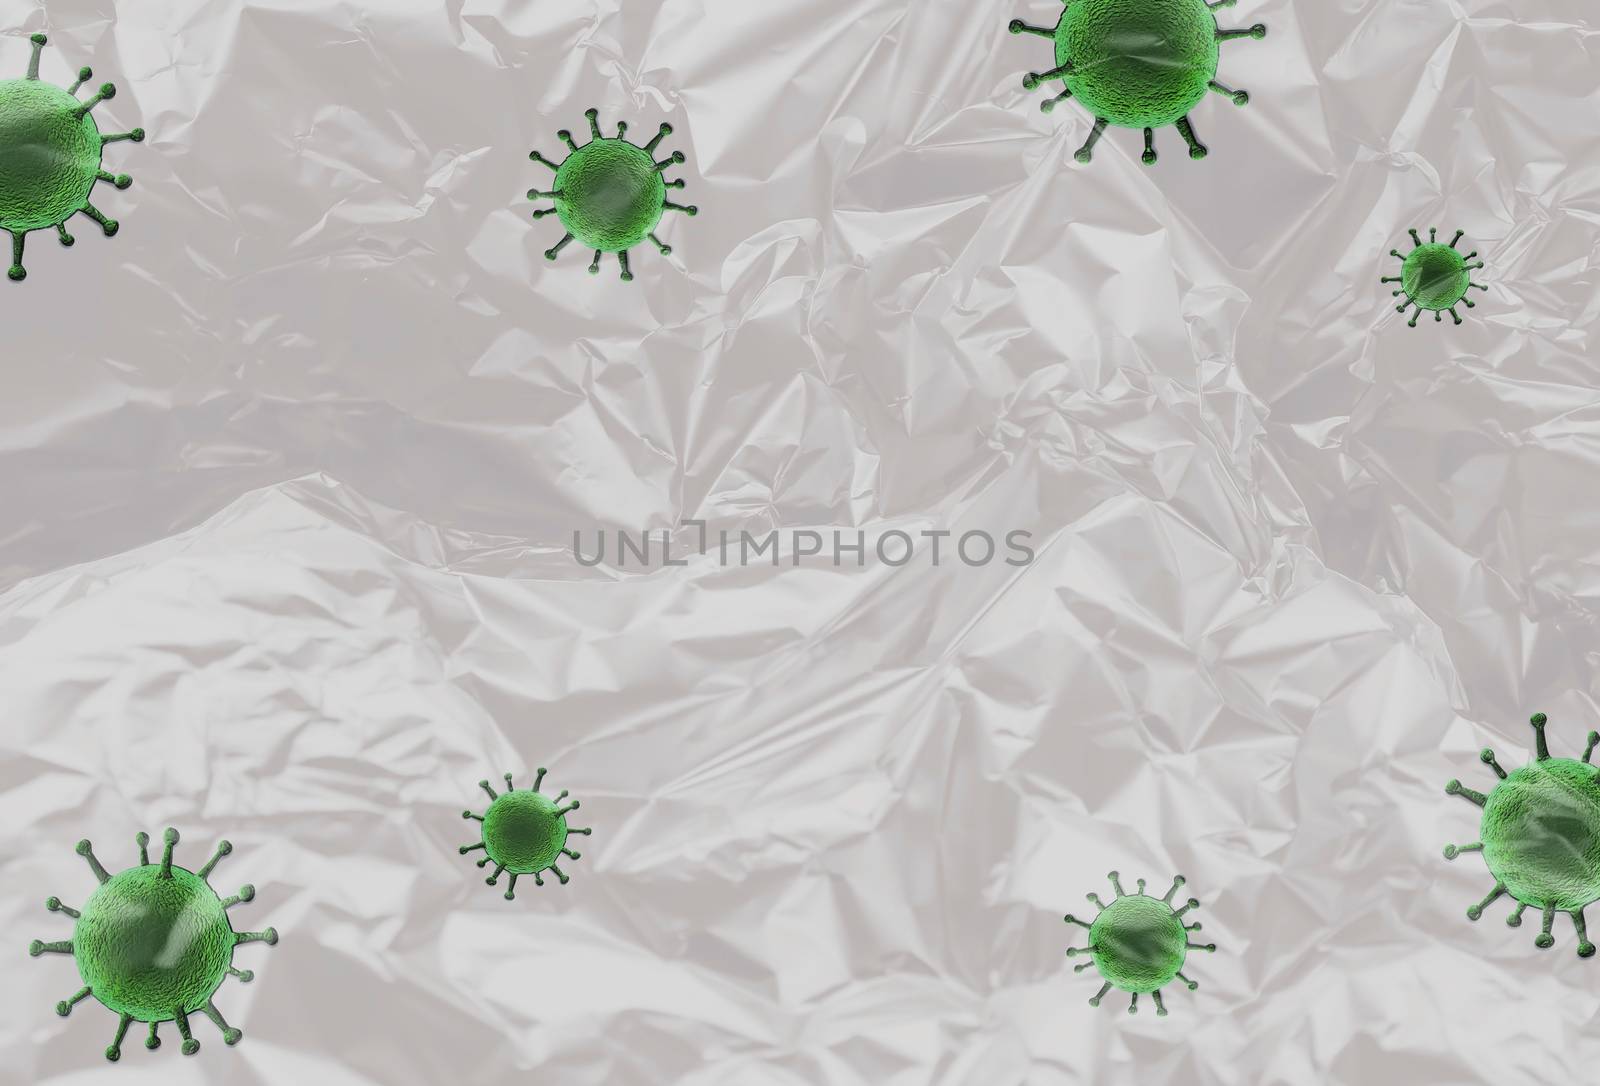 3D-Illustration of colorful isolated corona virus covered by pla by MP_foto71